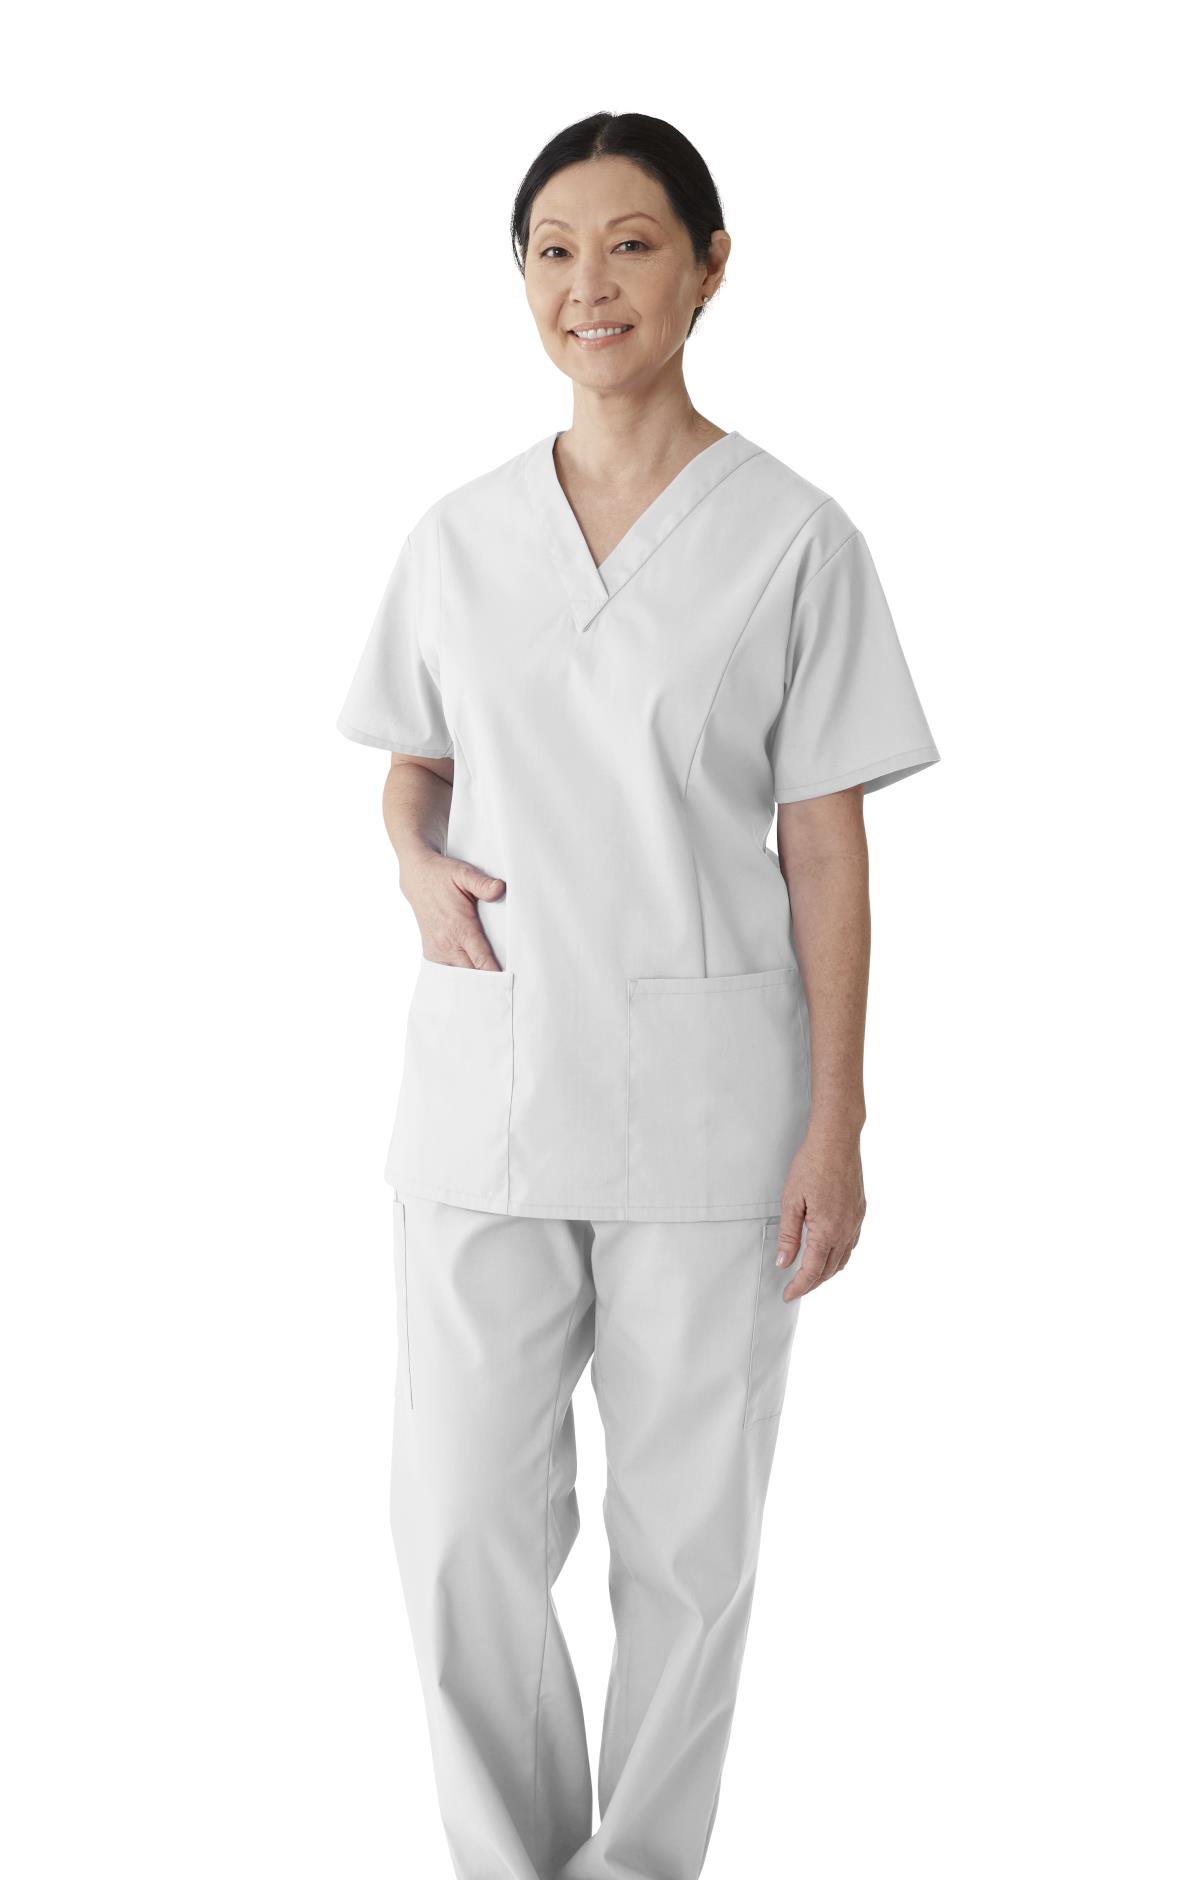 Medical suits for women - buy medical clothes at People in White